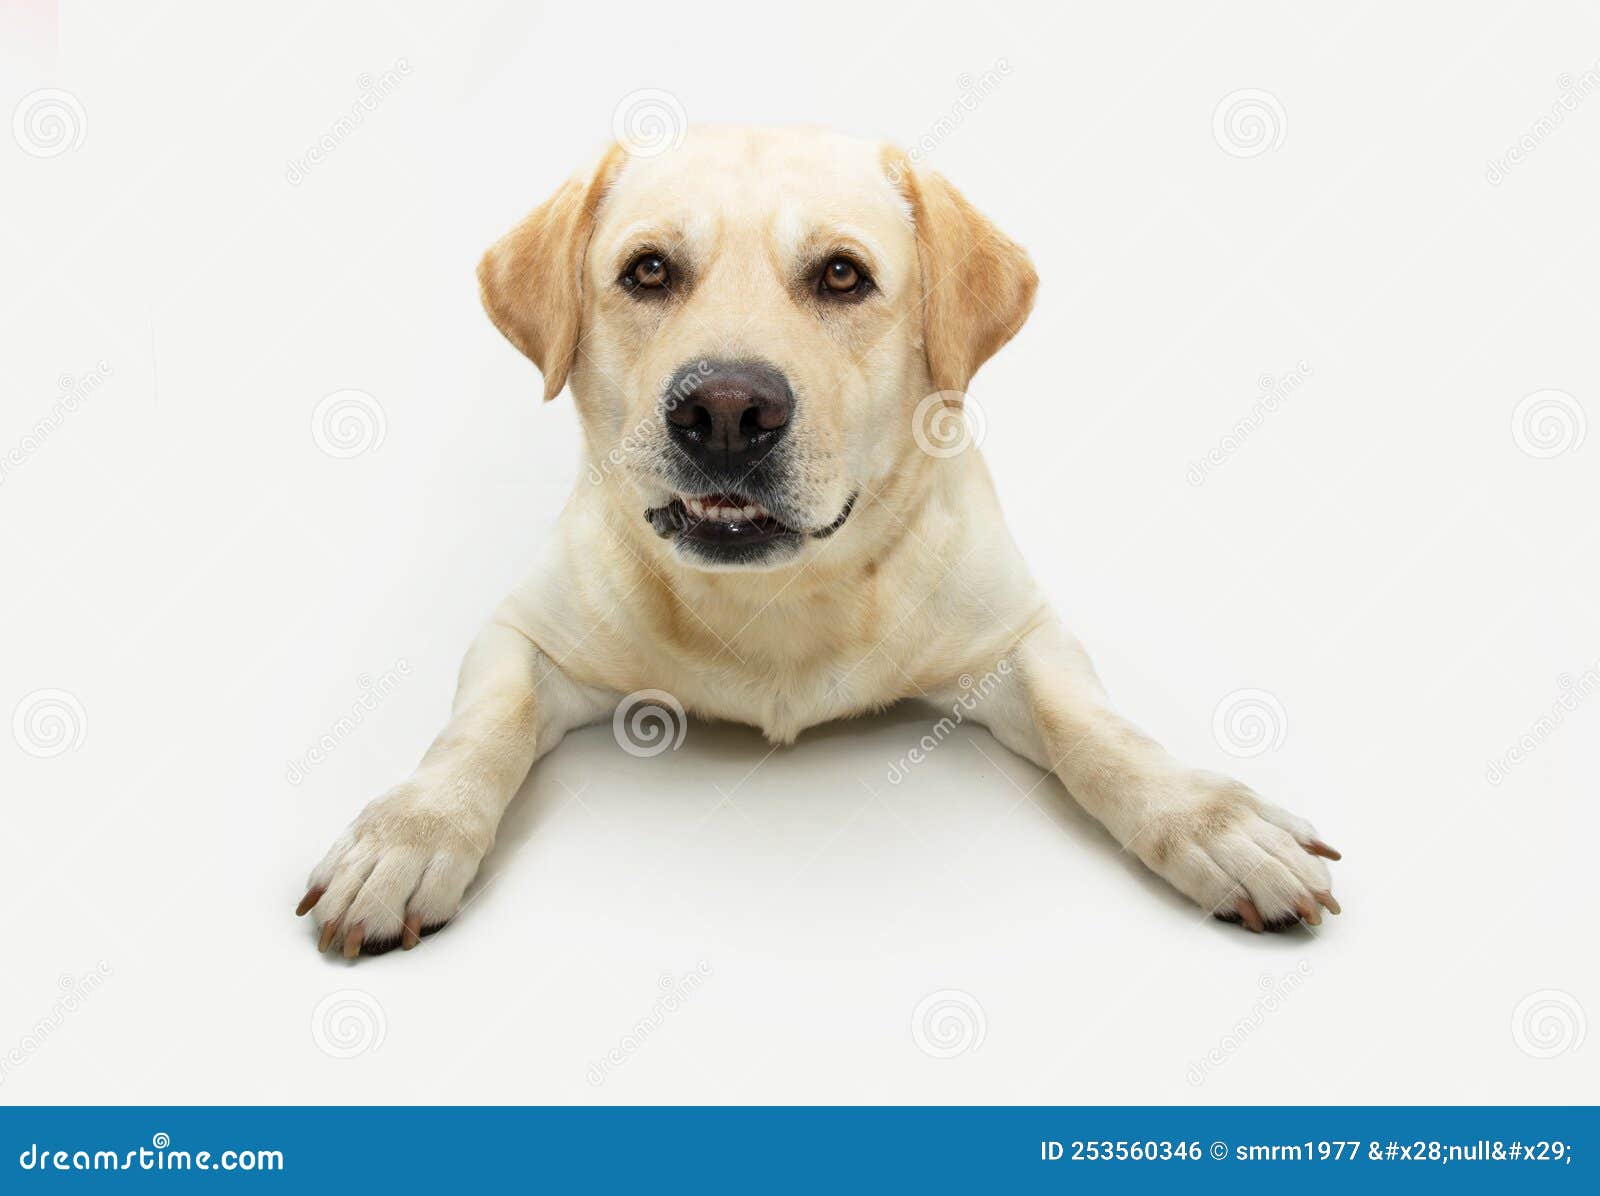 Portrait Funny Labrador Retriever Dog Making a Face. Isolated on White  Background Stock Photo - Image of indoors, puppy: 253560346